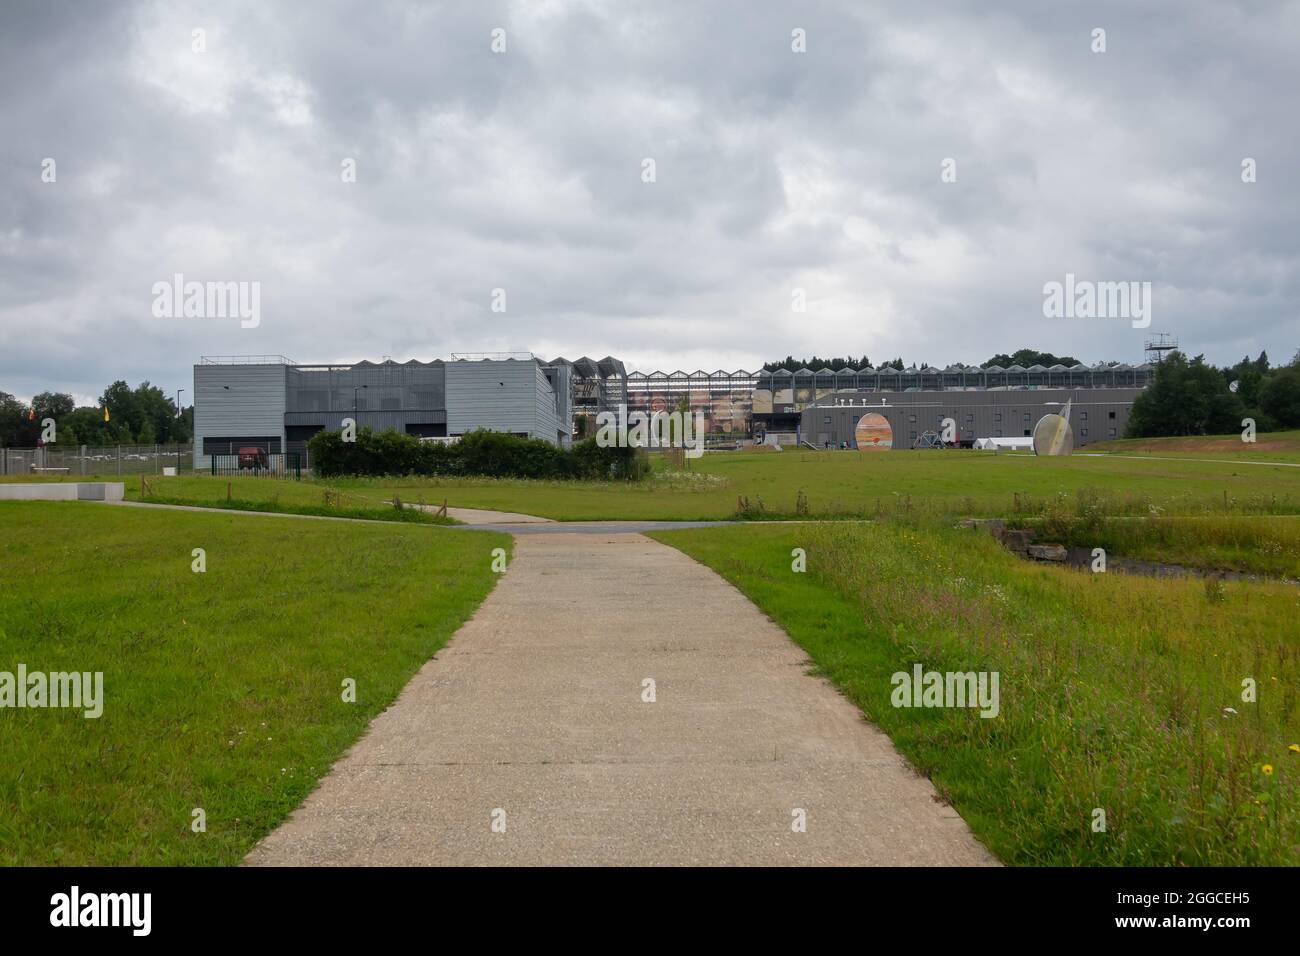 Transinne, Wallonia, Belgium - August 10, 2021: Euro Space Center and Galileo ILS Centre buildings seen from back of green domain under heavy rainy cl Stock Photo